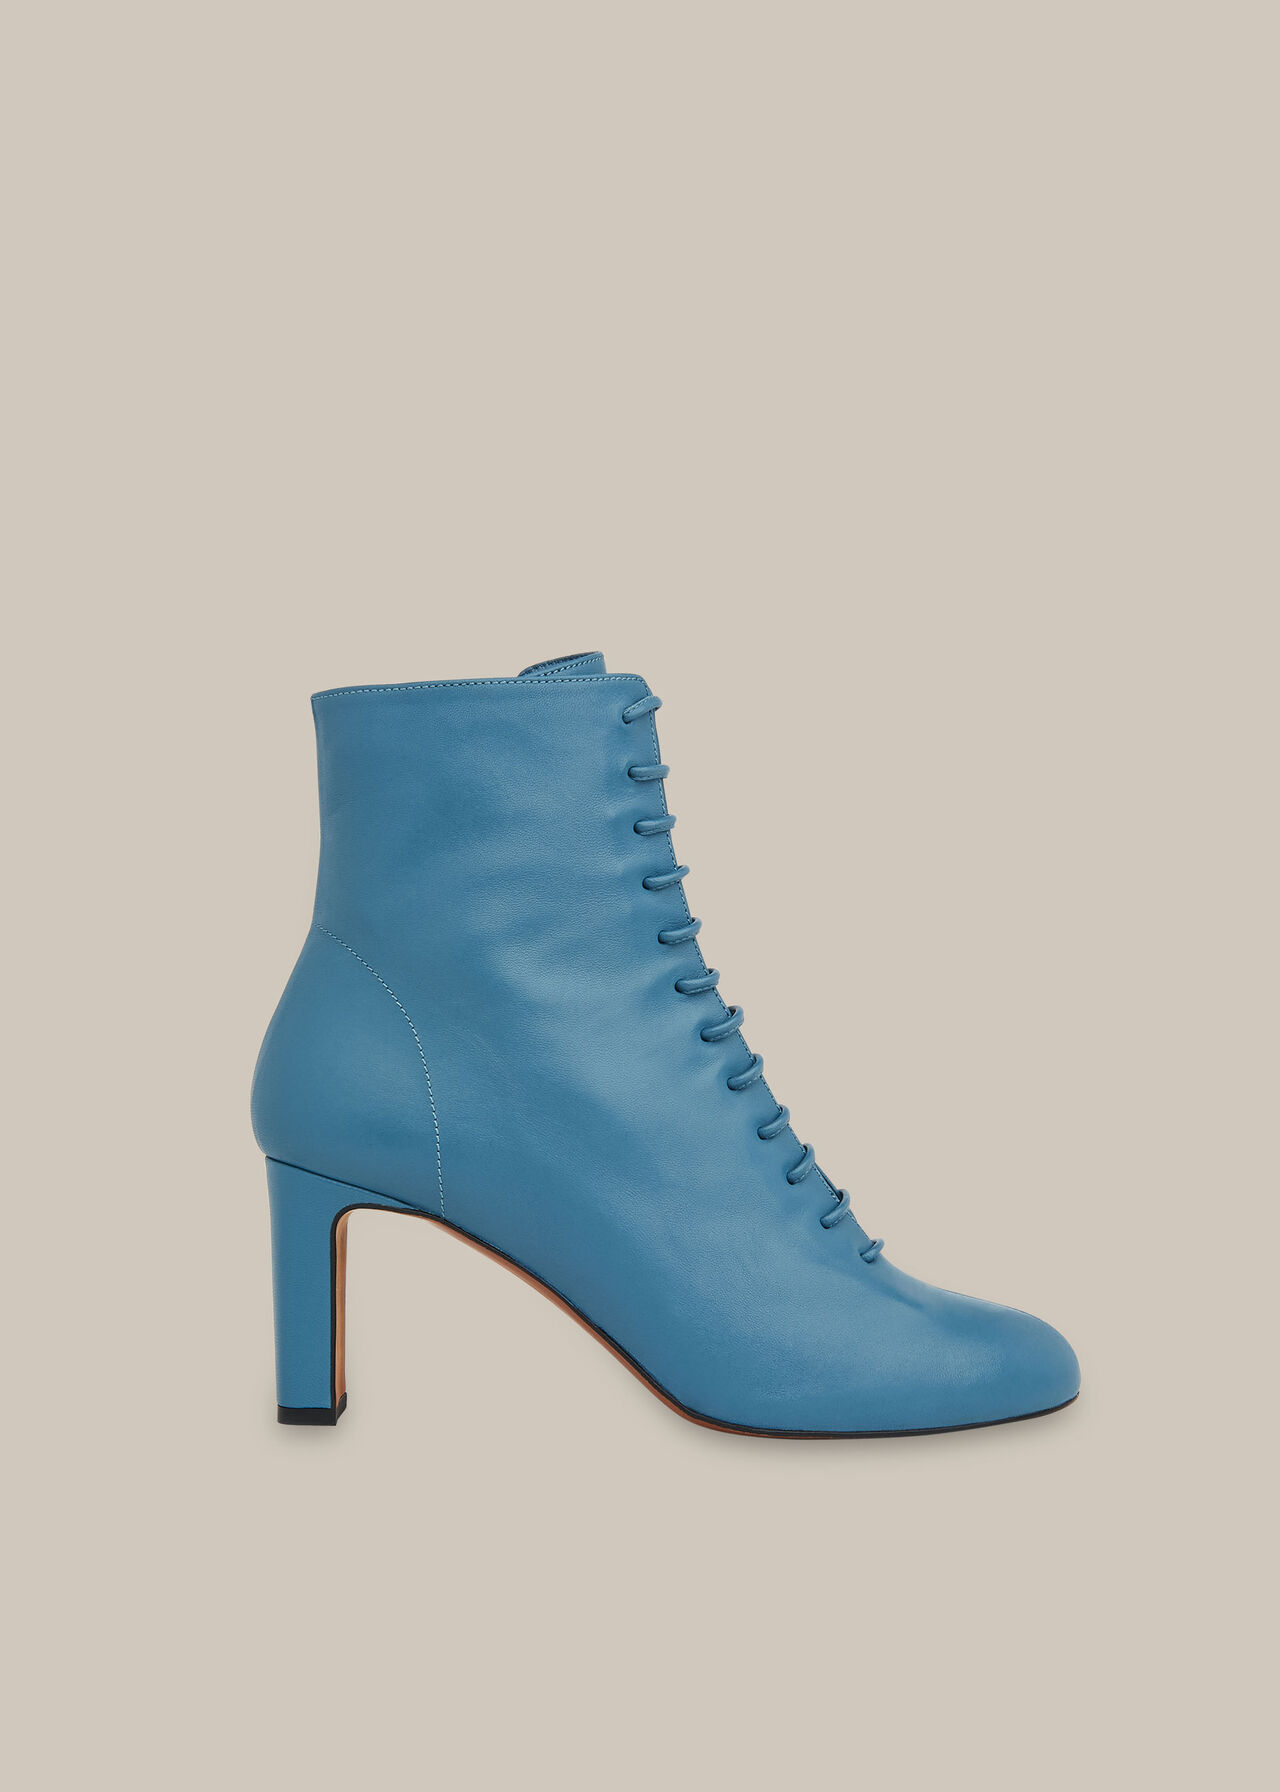 Blue Dahlia Lace Up Boot | WHISTLES | Whistles UK